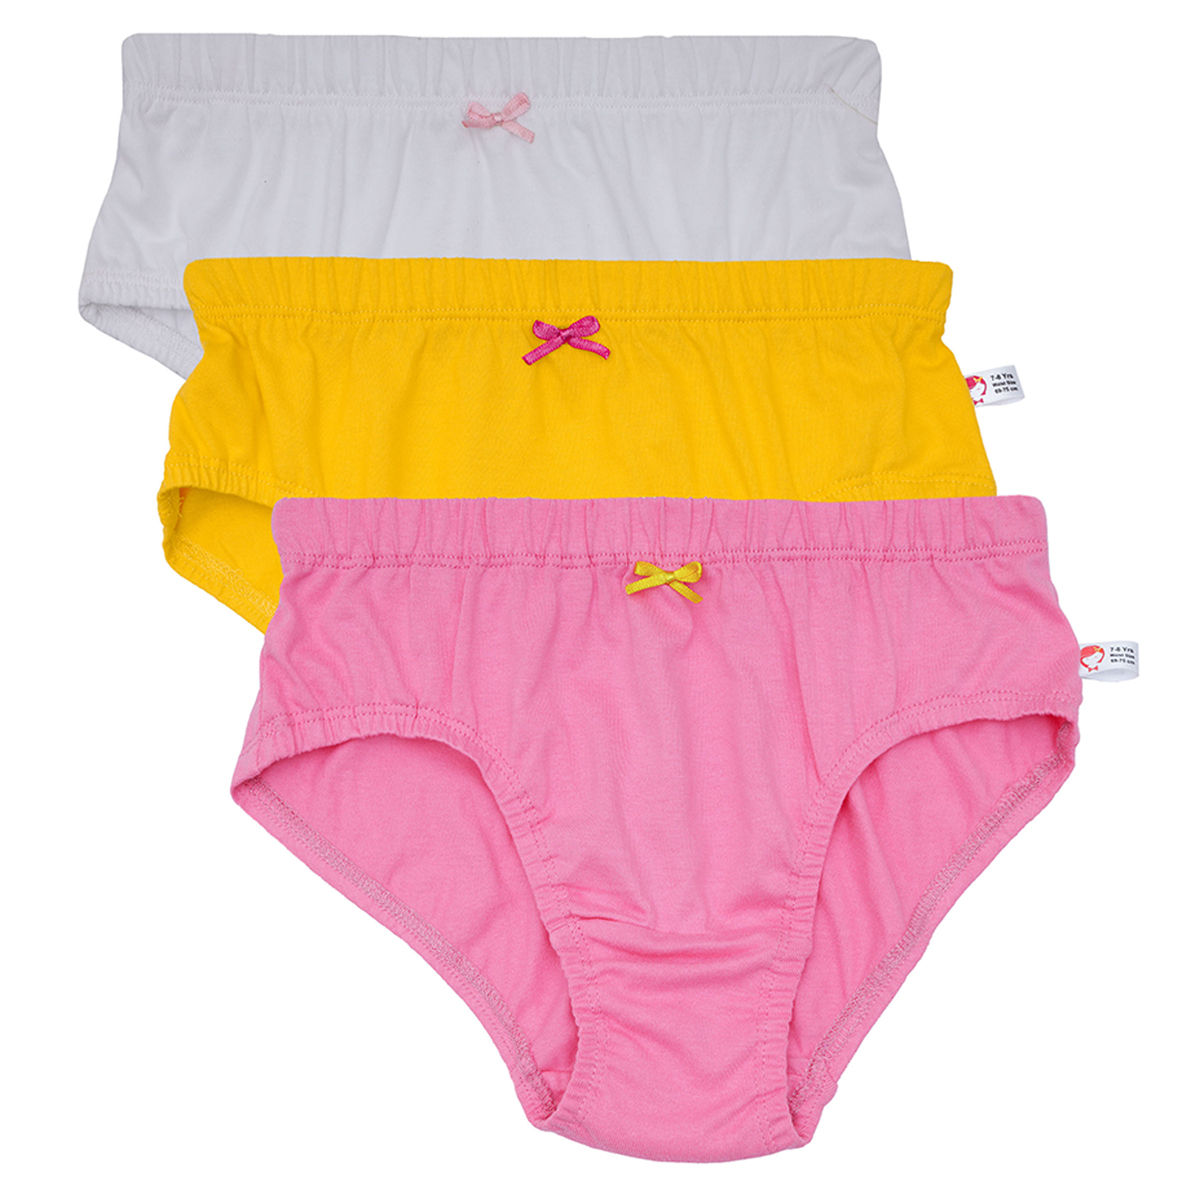 Dchica Pack Of 3 Cotton Panties For Girls Multi Color 14 16 Years Buy Dchica Pack Of 3 